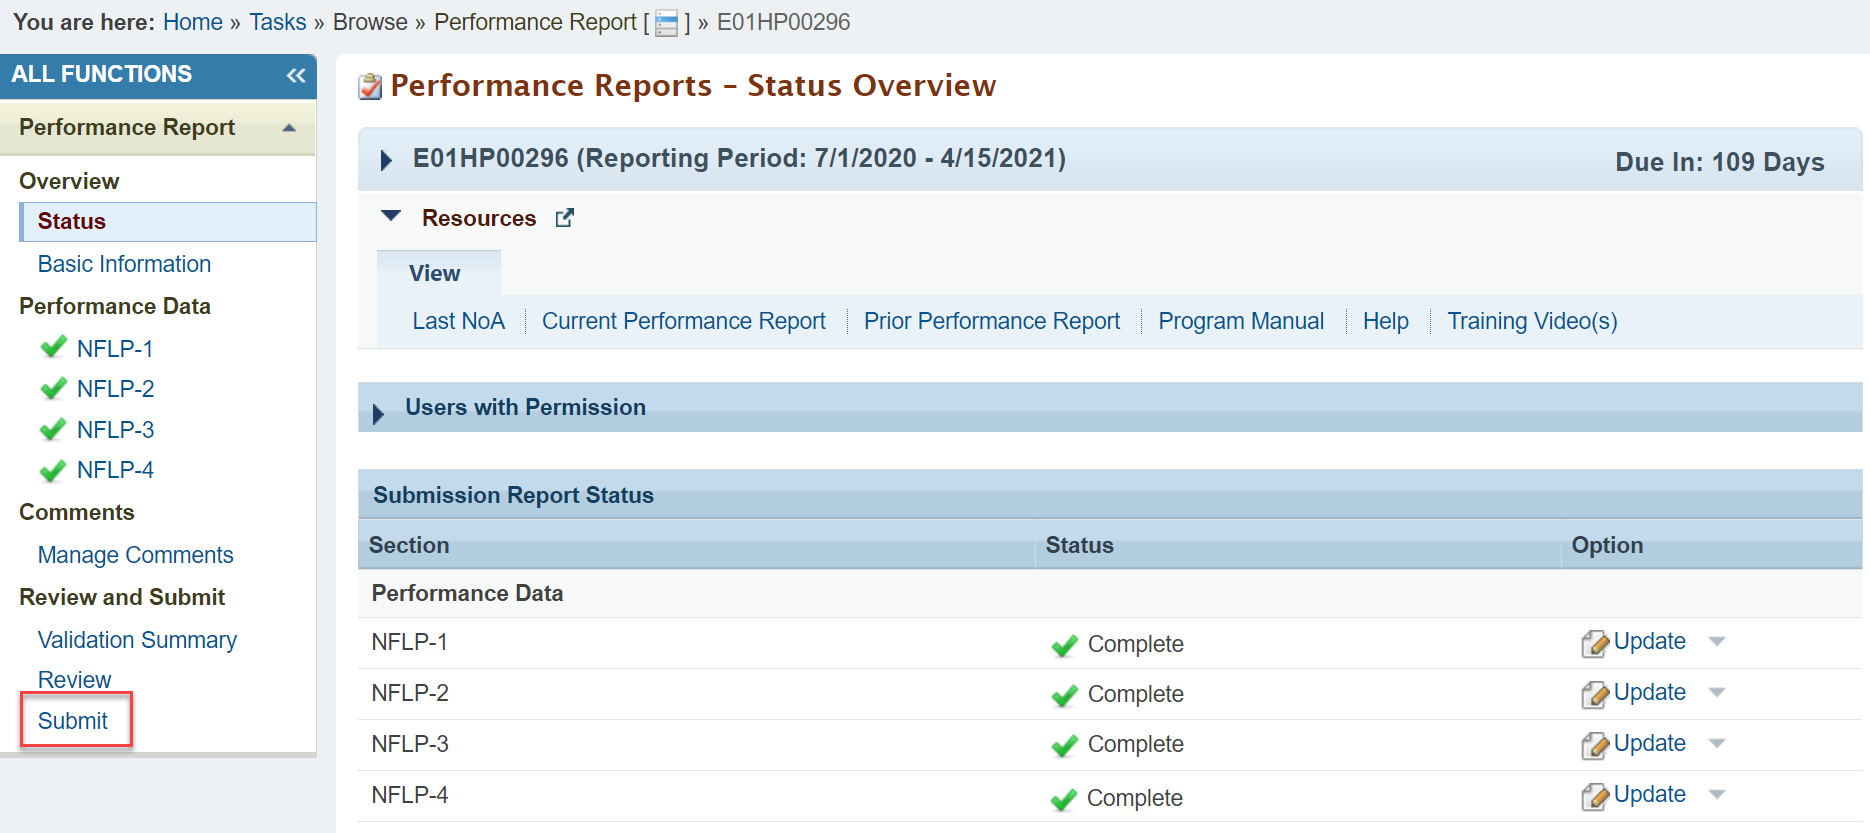 Screenshot of the Performance Reports Status Overview page for NFLP deliverables showing the Submit Option